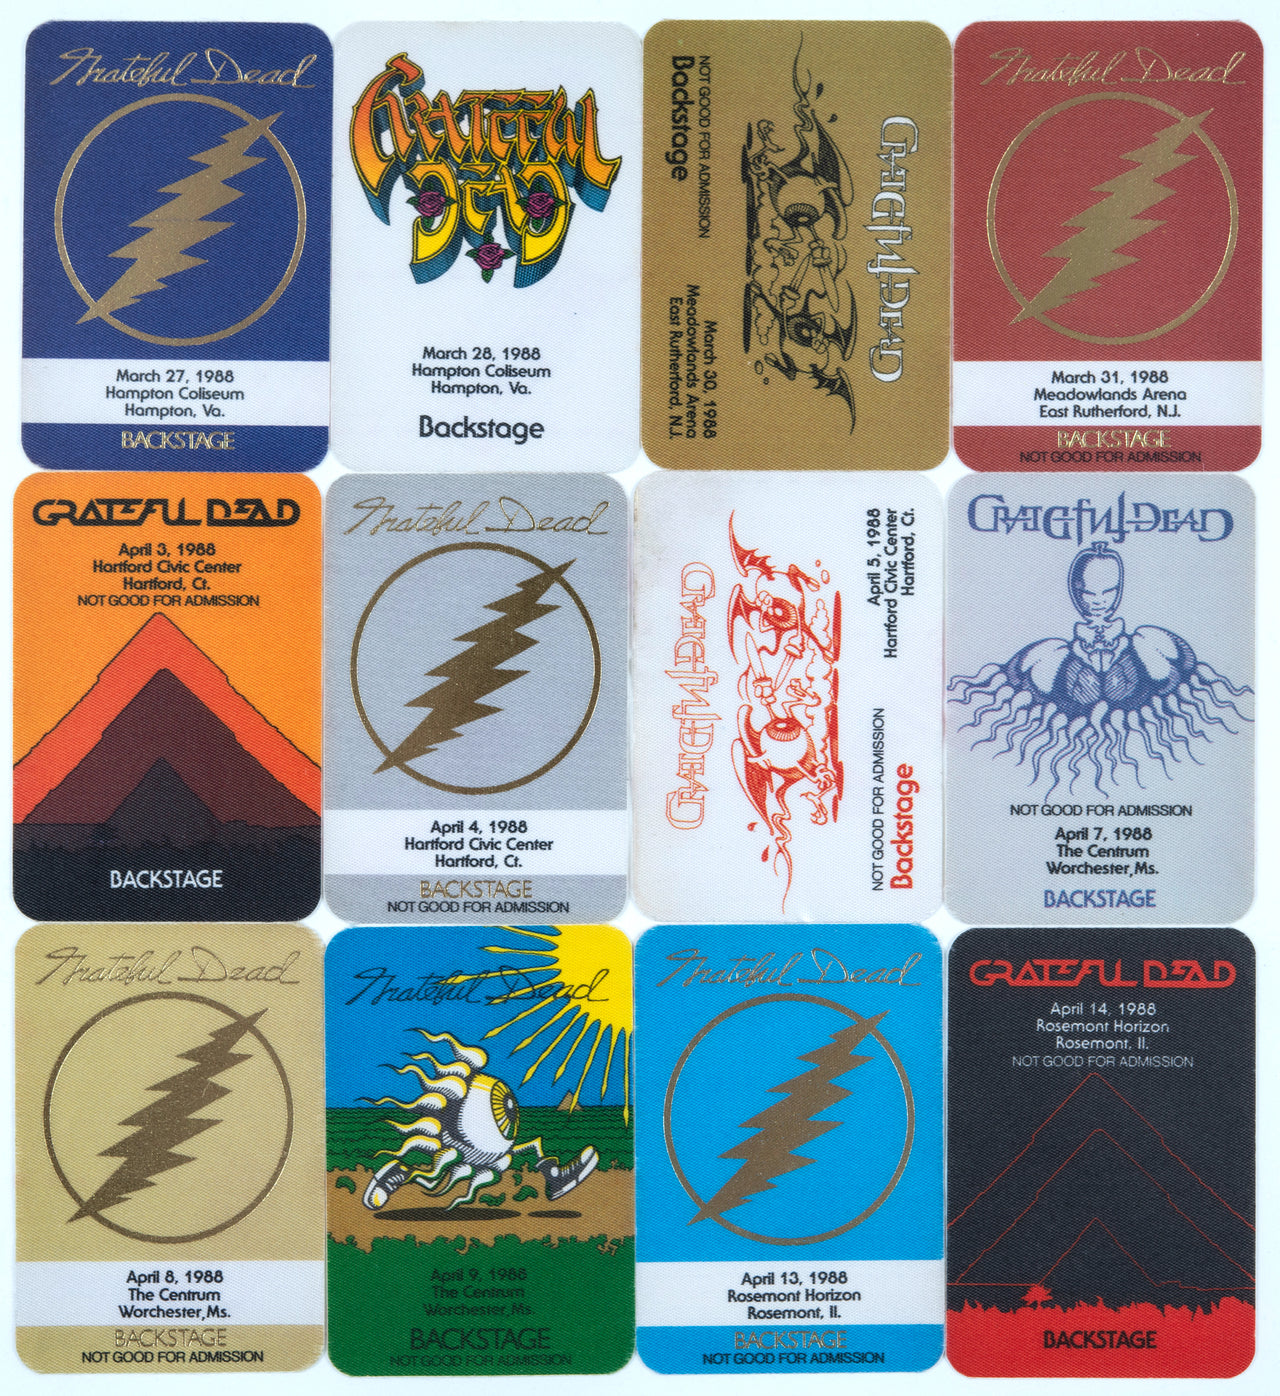 Grateful Dead Backstage Passes (3/27/1988 - 4/14/1988) from Dan Healy